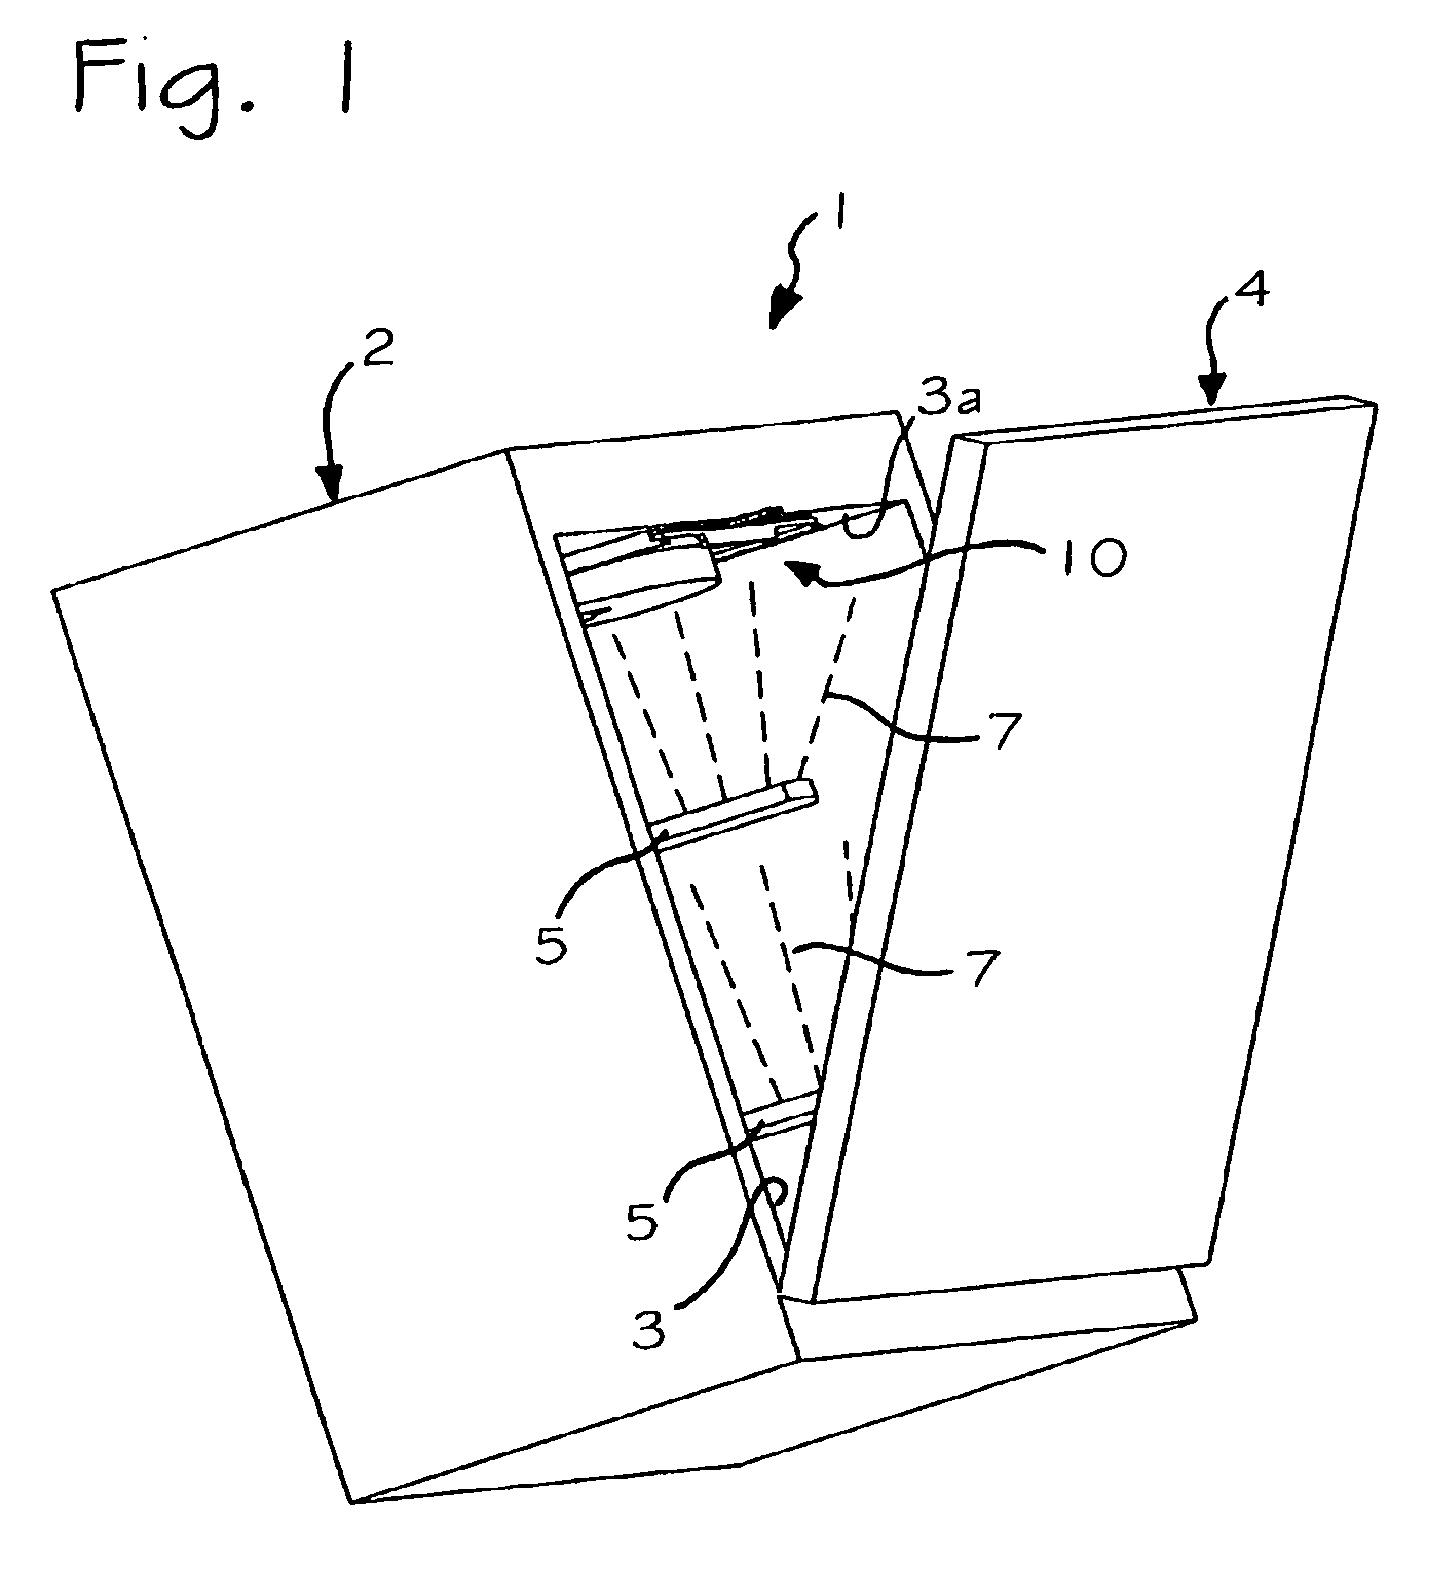 Dispensing device, particularly for domestic appliances